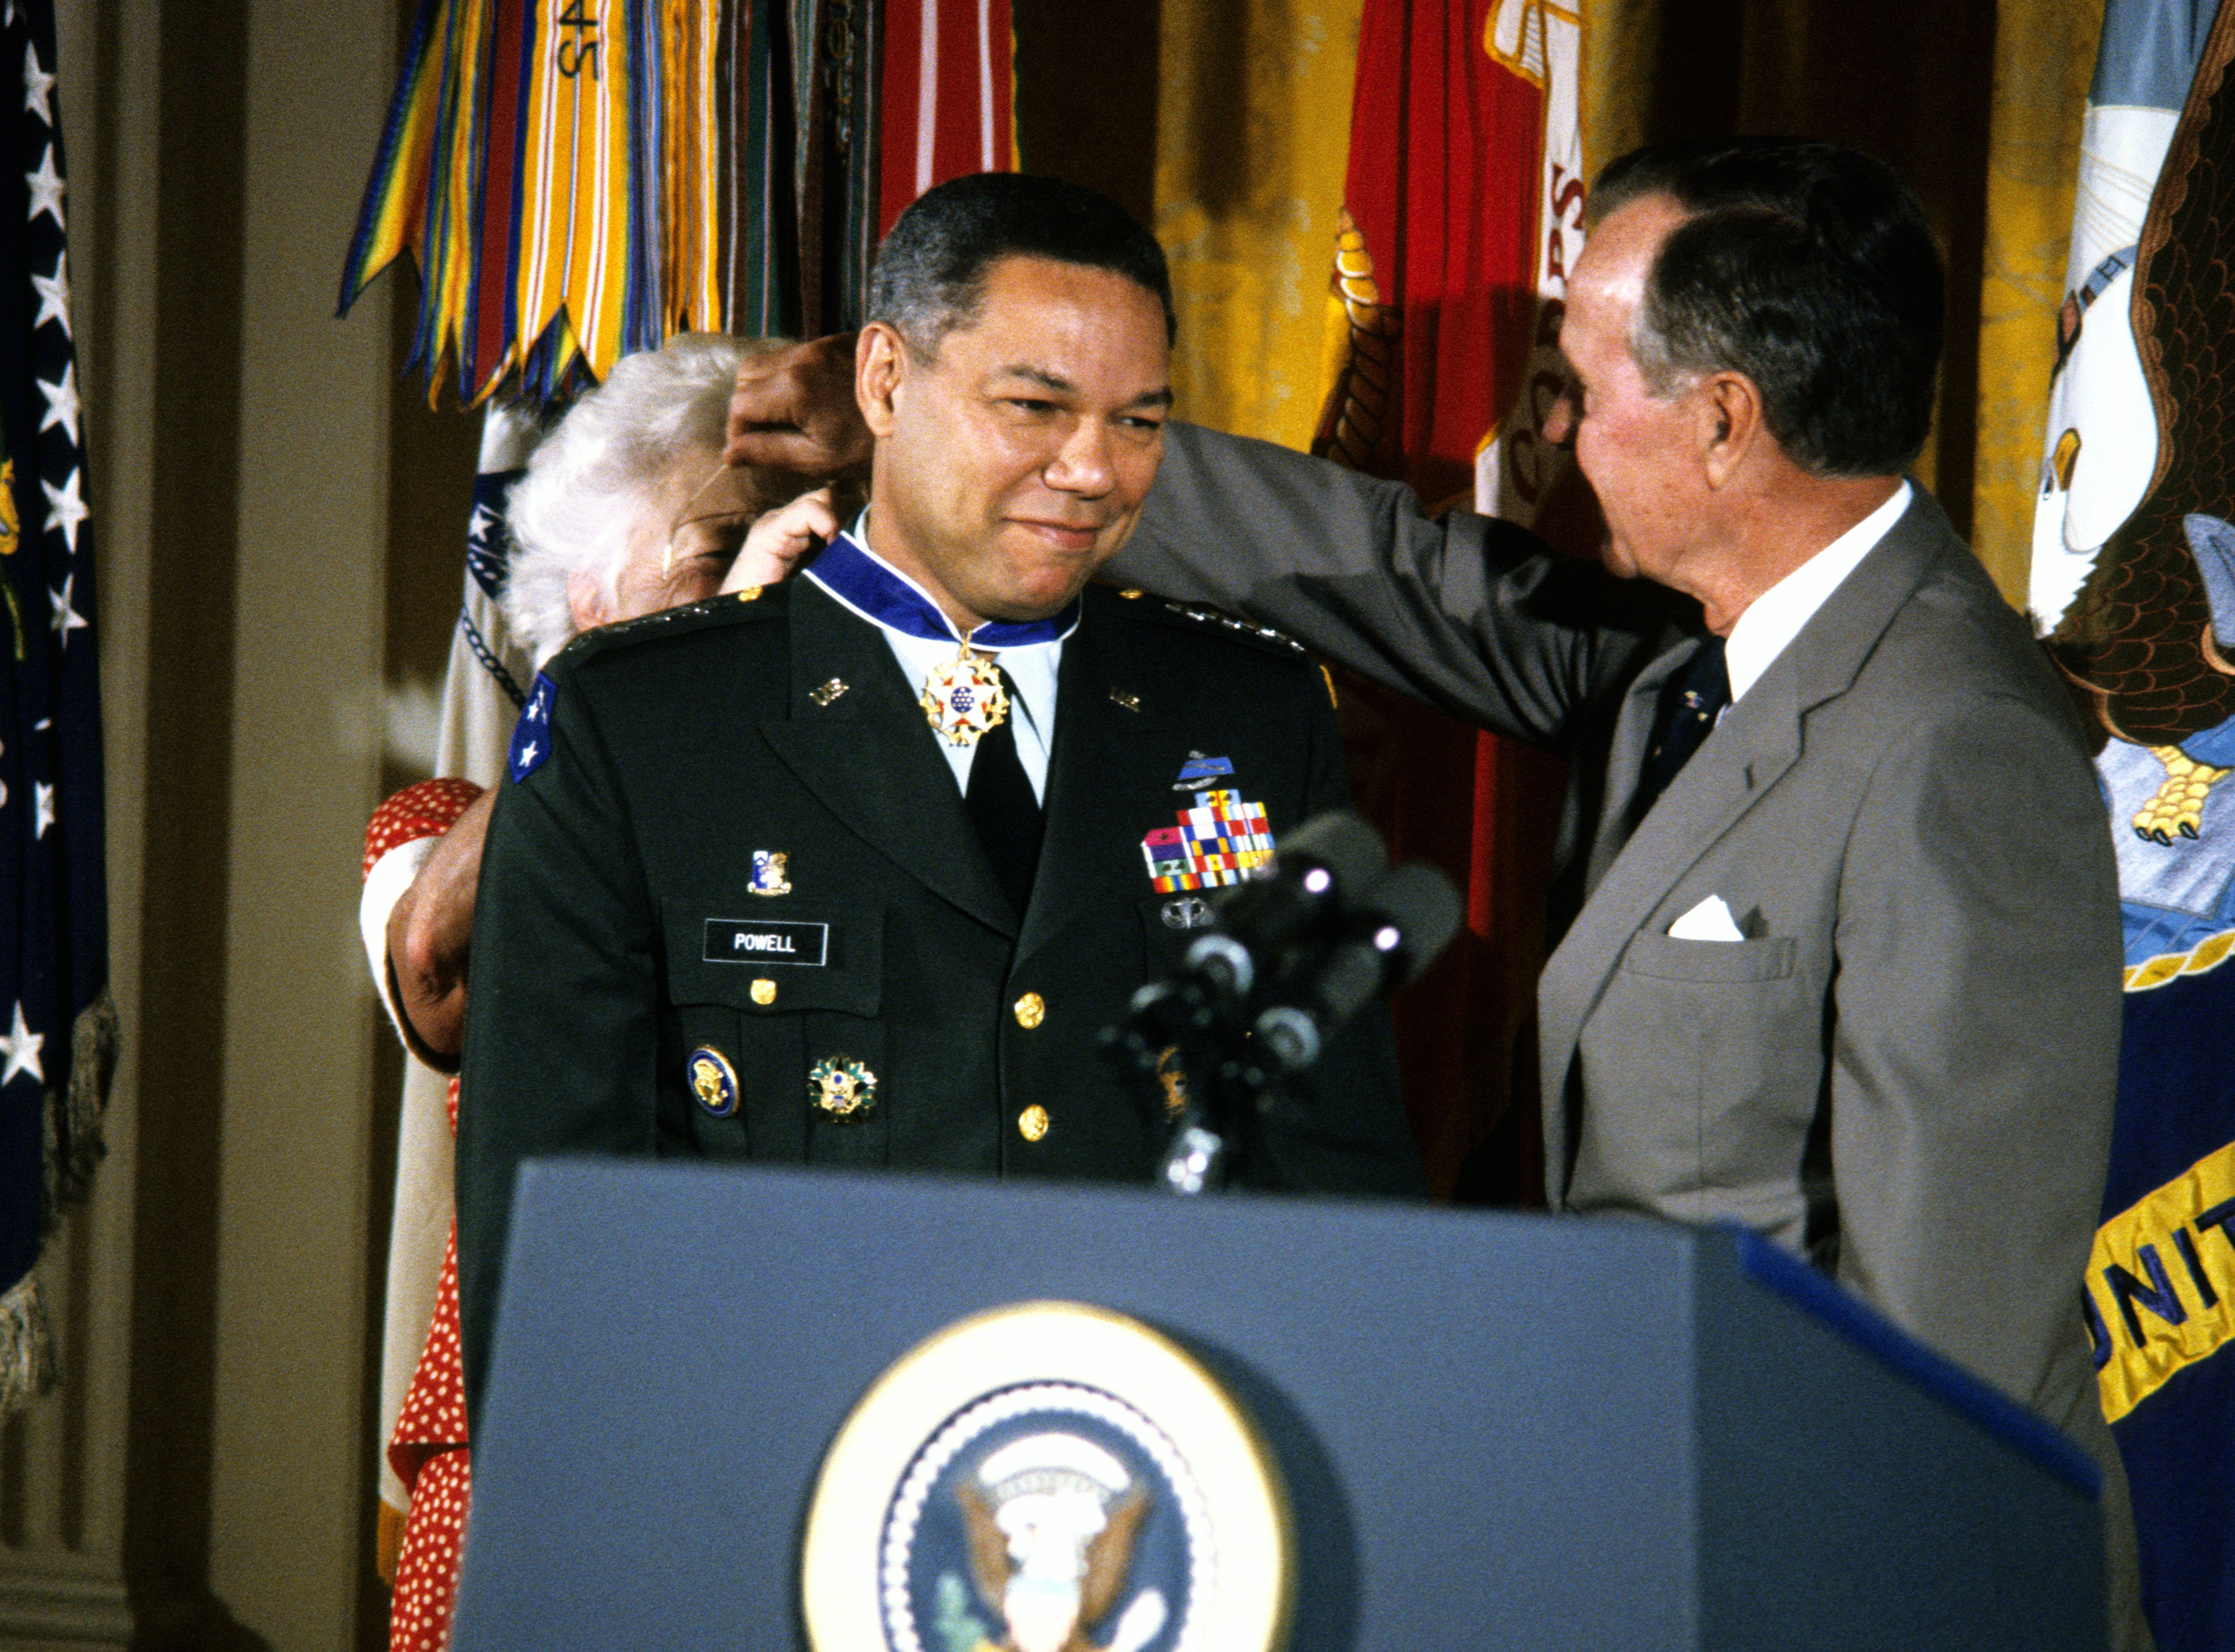 General Powell being awarded the medal of freedom